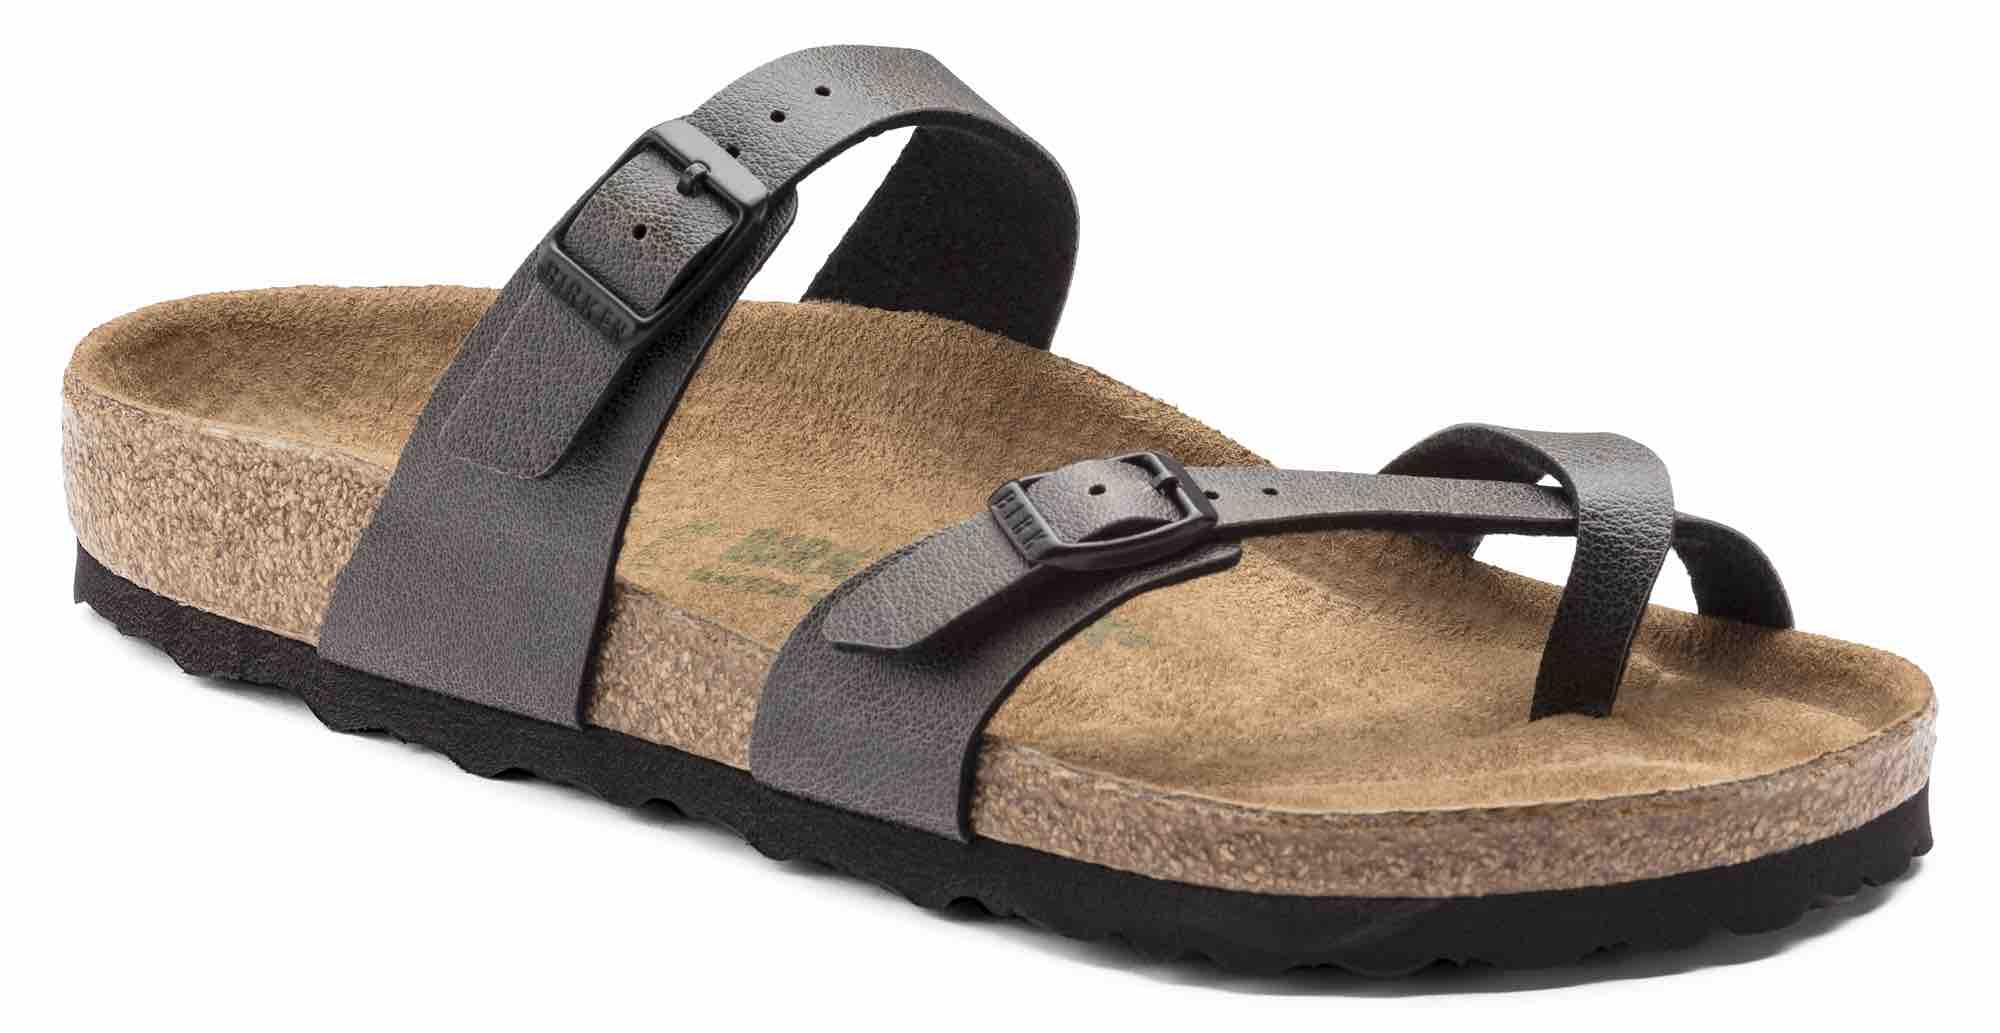 Vegan Birkenstocks Are A Thing, But 